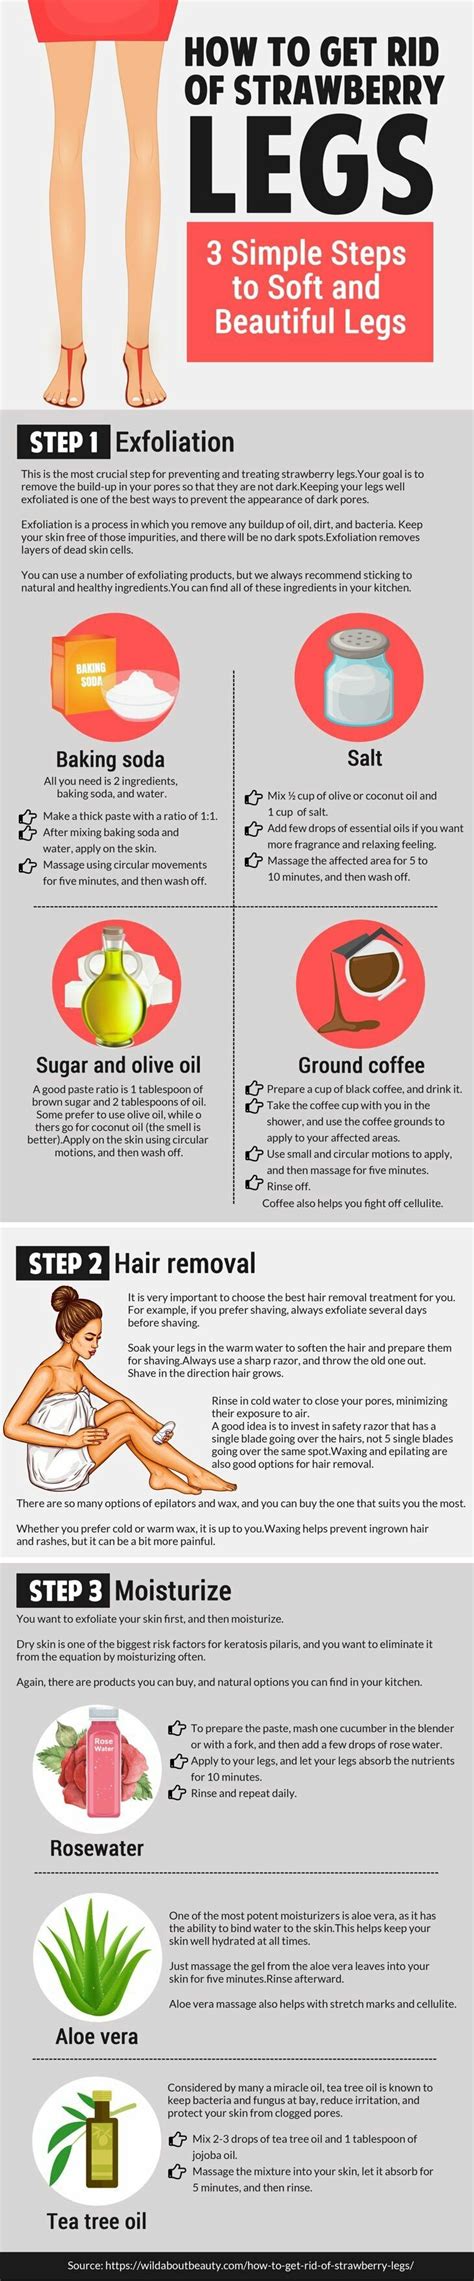 Pin By Jctvcrazy On Health And Beauty Strawberry Legs Beauty Tips